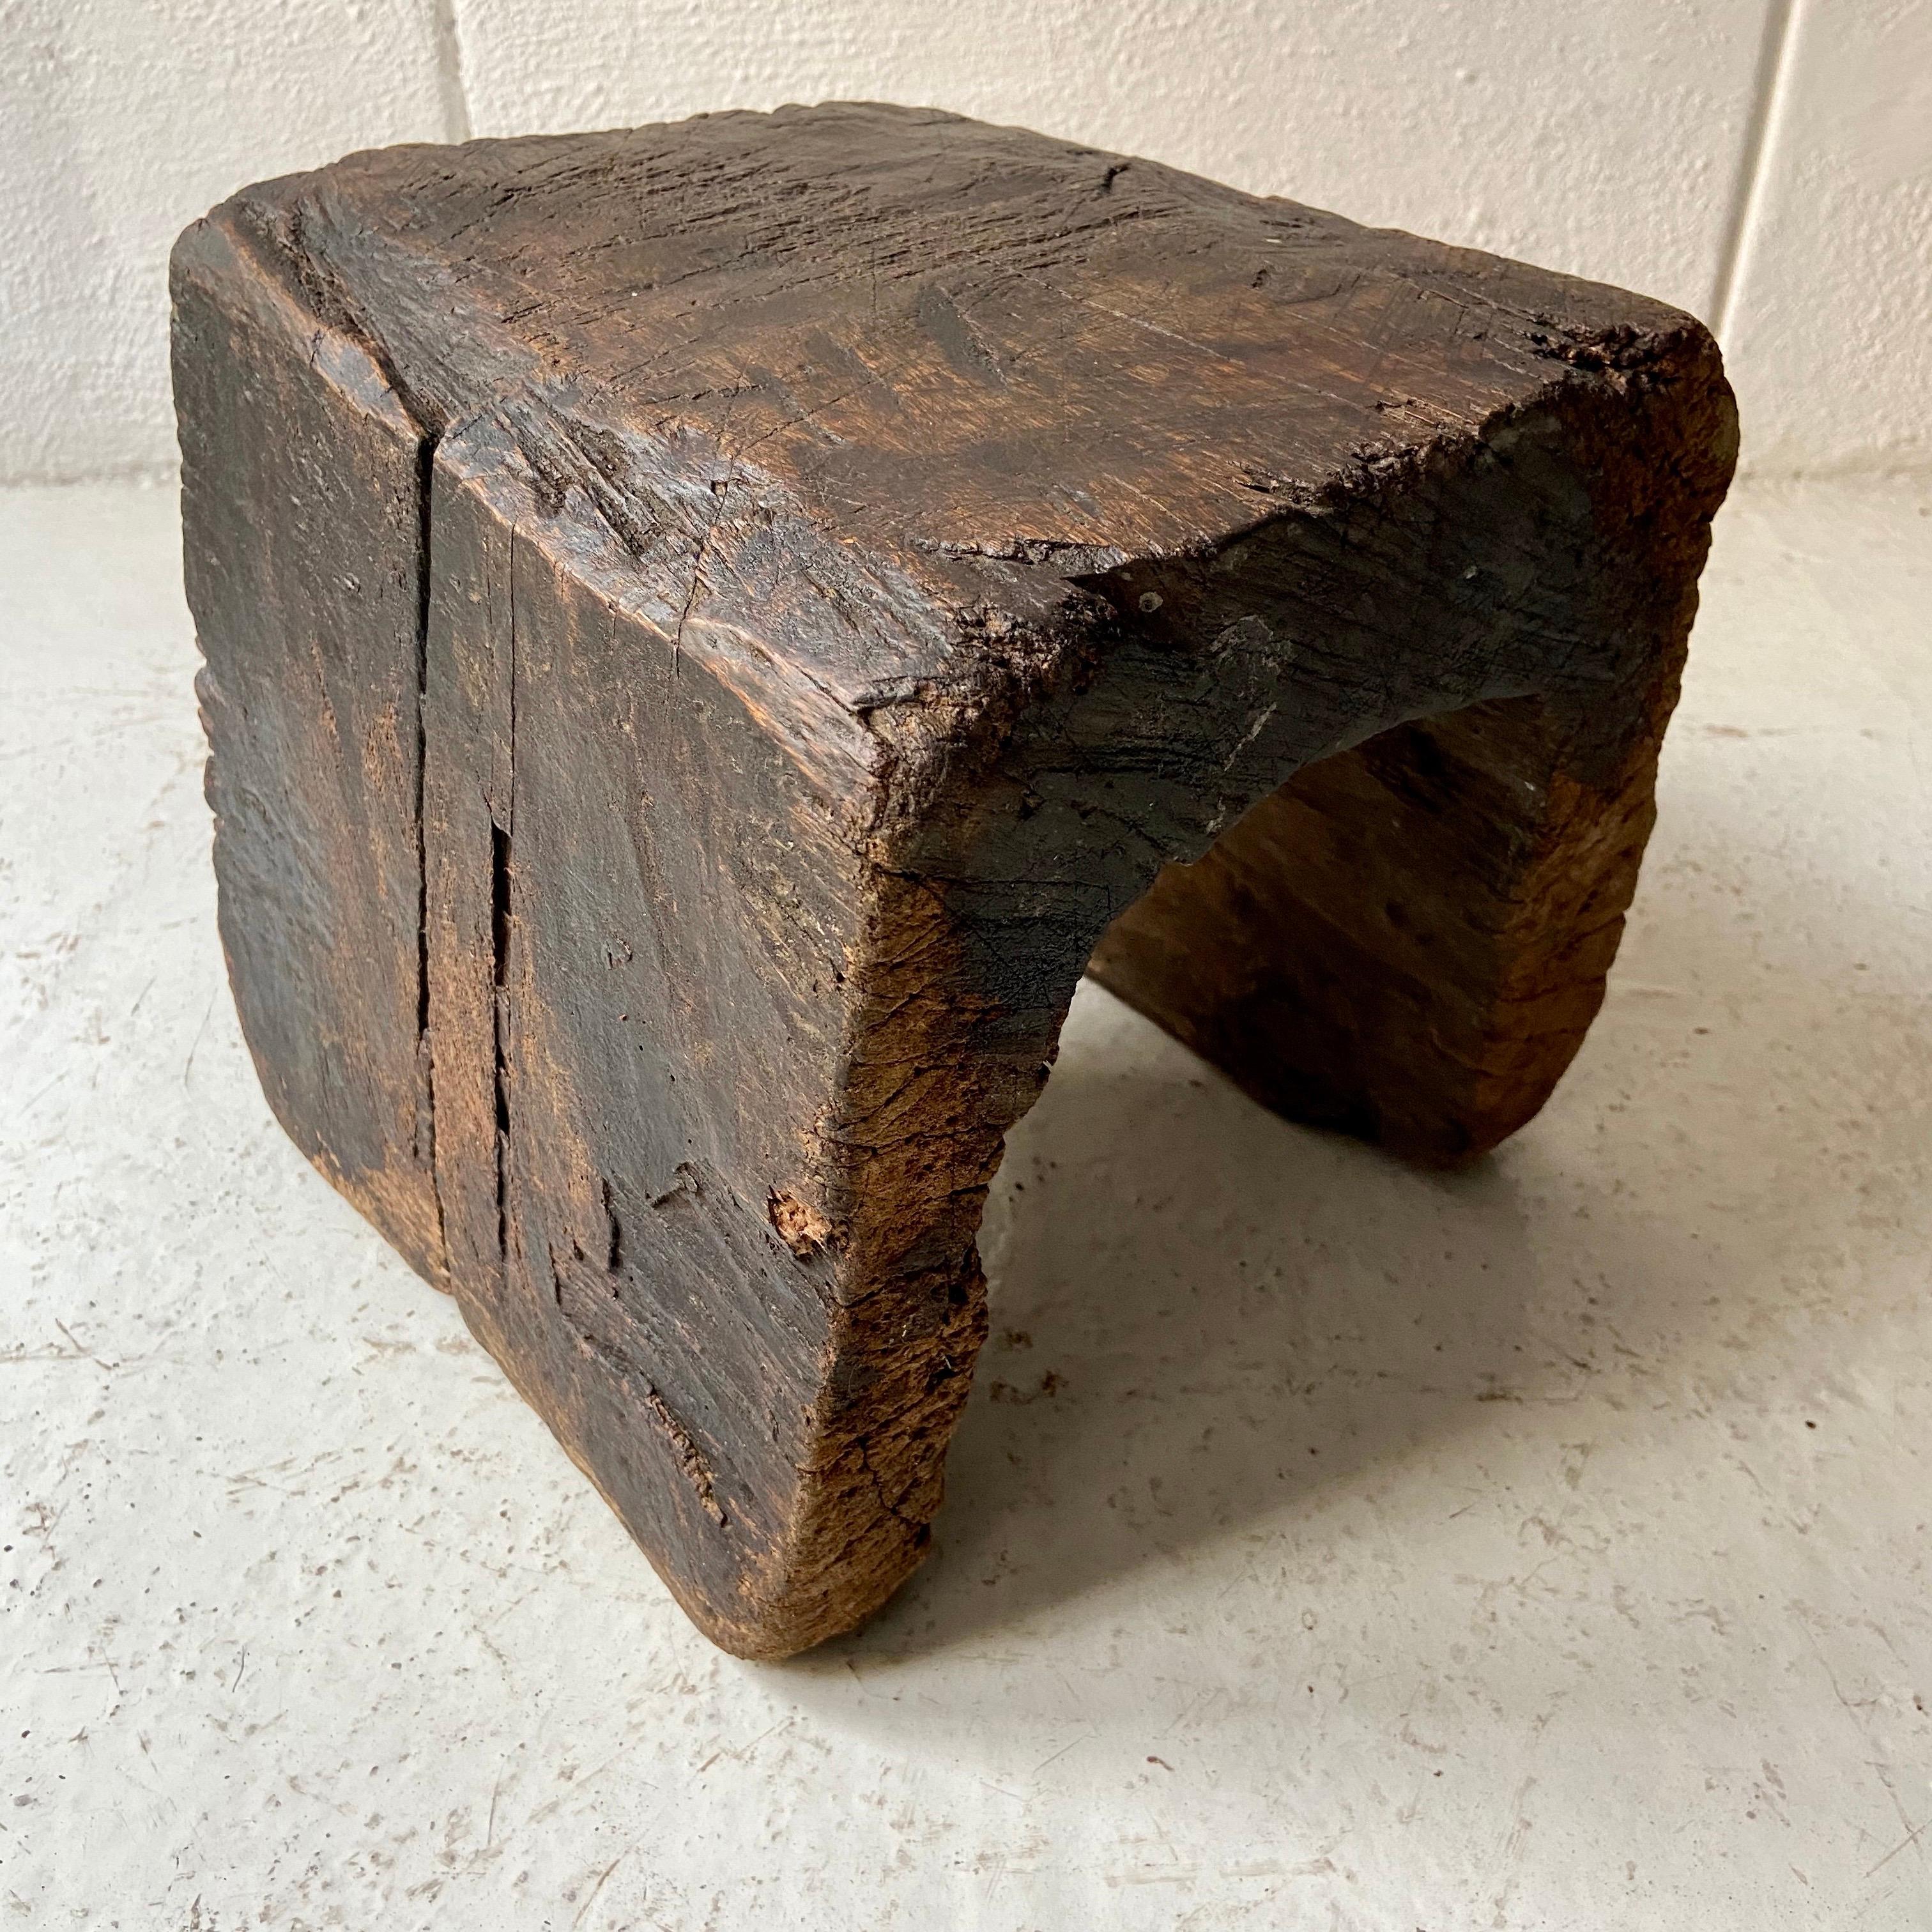 Hand-Carved Primitive Styled Hardwood Dining Stool from Mexico, circa 1920s